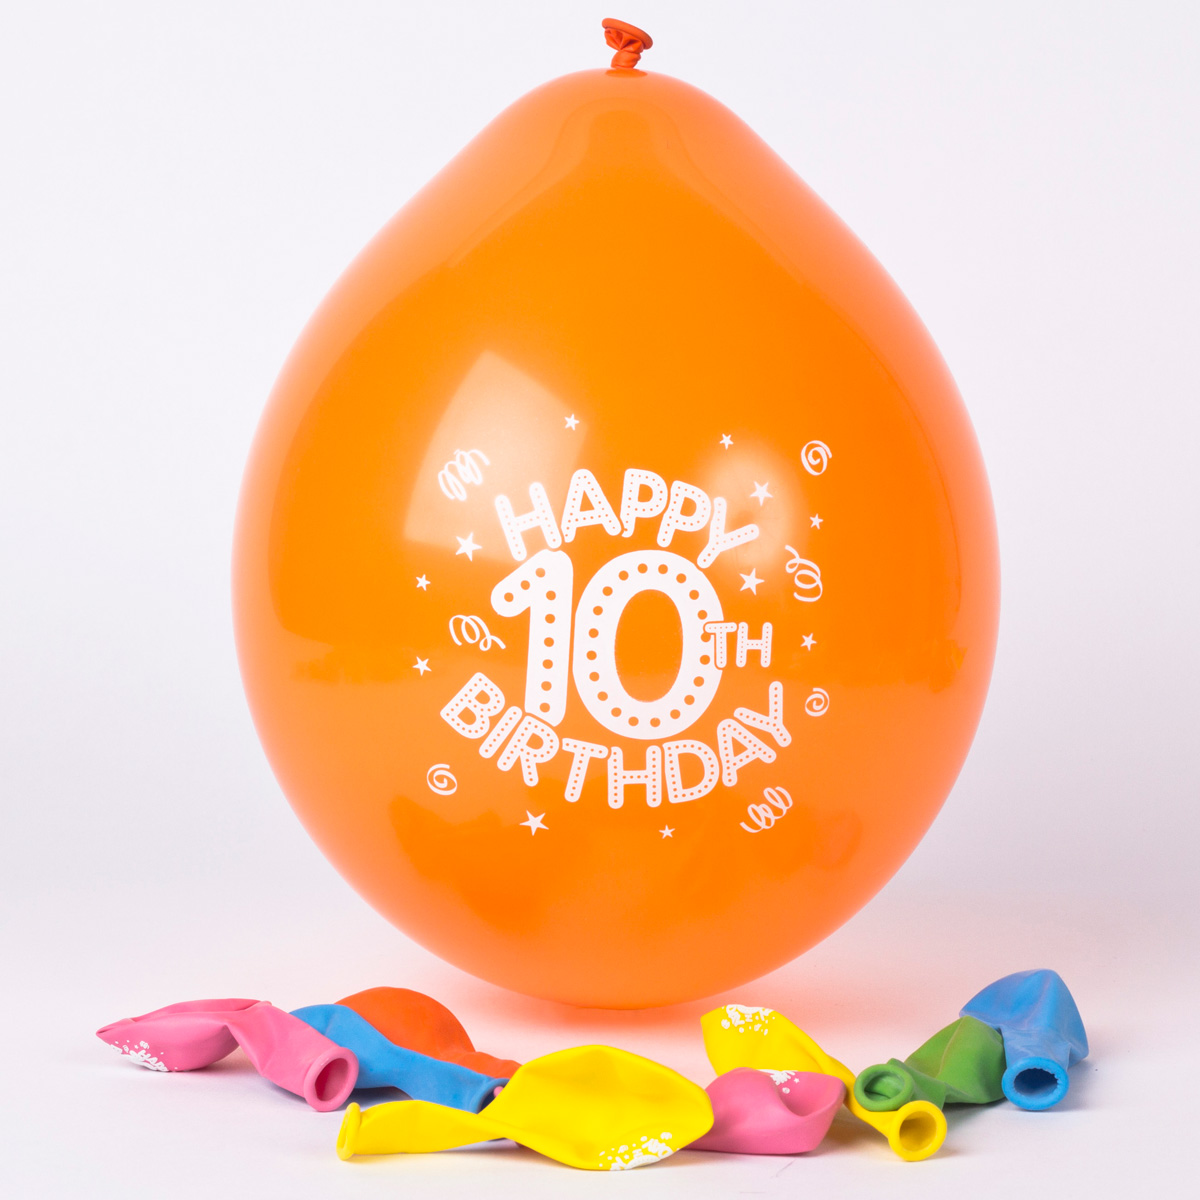 Multicoloured Age 10 Small Air-fill Latex Balloons - Pack Of 10